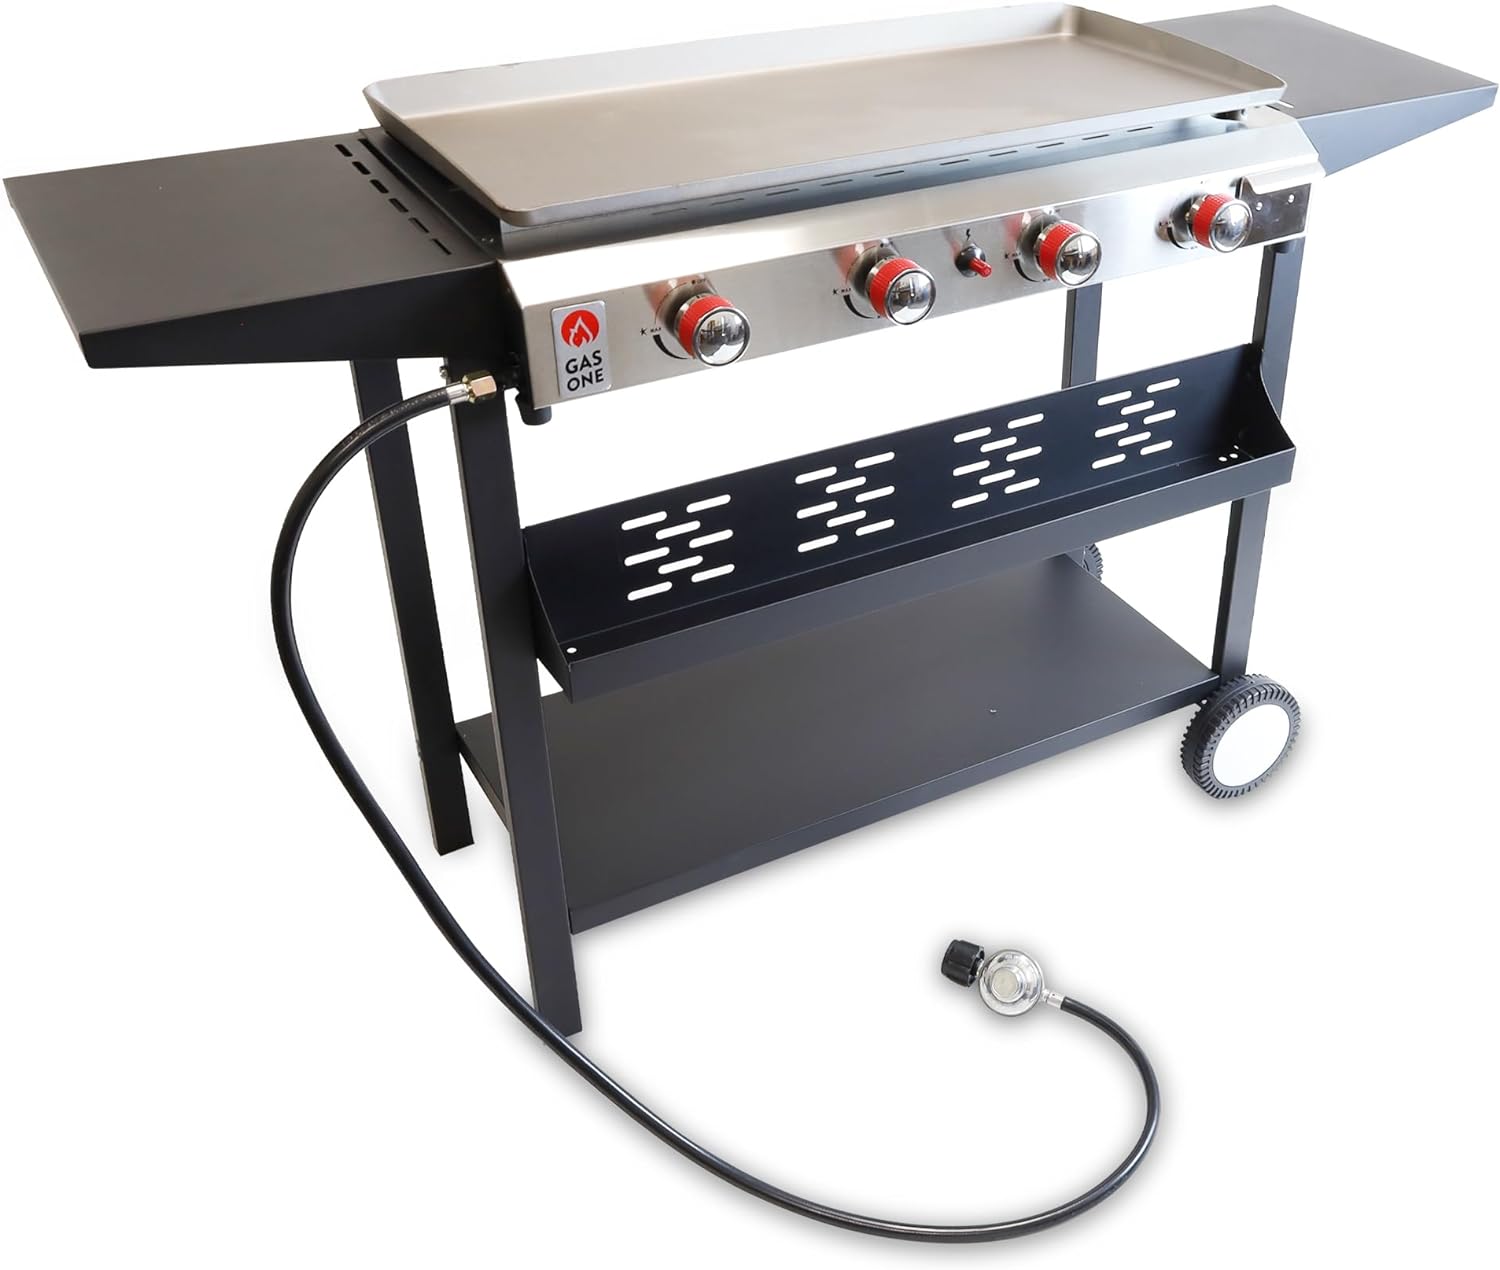 Gas One Flat Top Grill Review